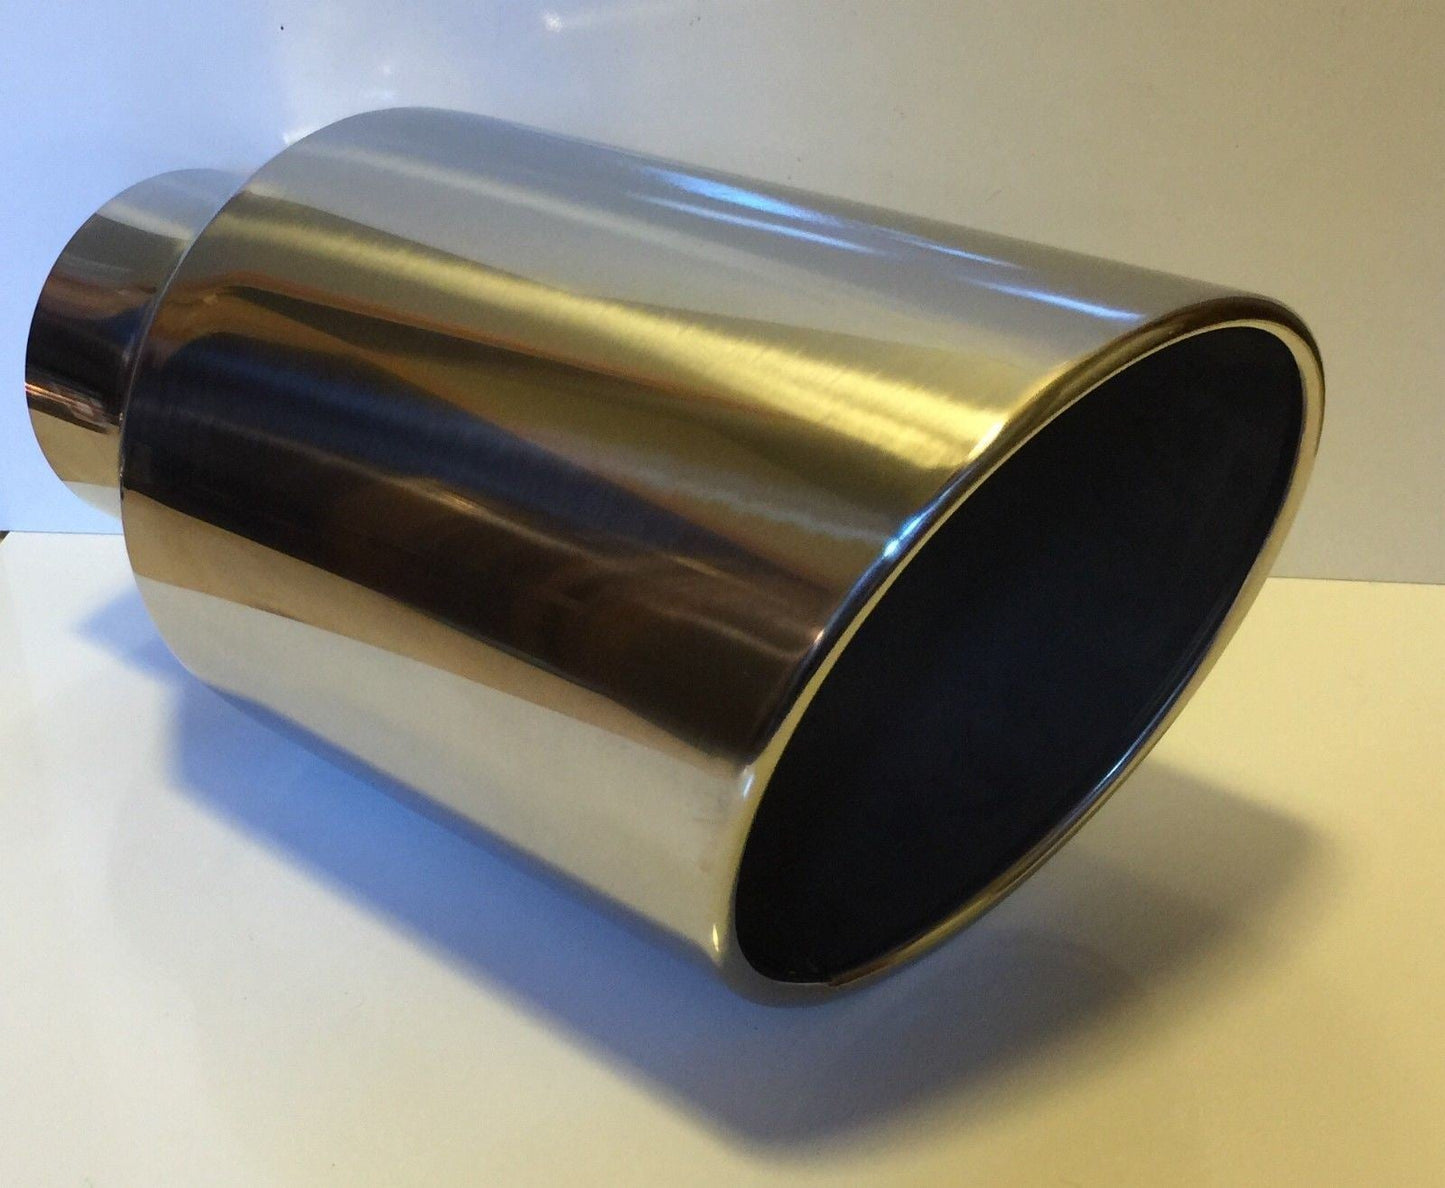 CHEVY DURAMAX 6.6L 4" IN x 8" OUT x 18" LONG POLISHED STAINLESS EXHAUST TIP